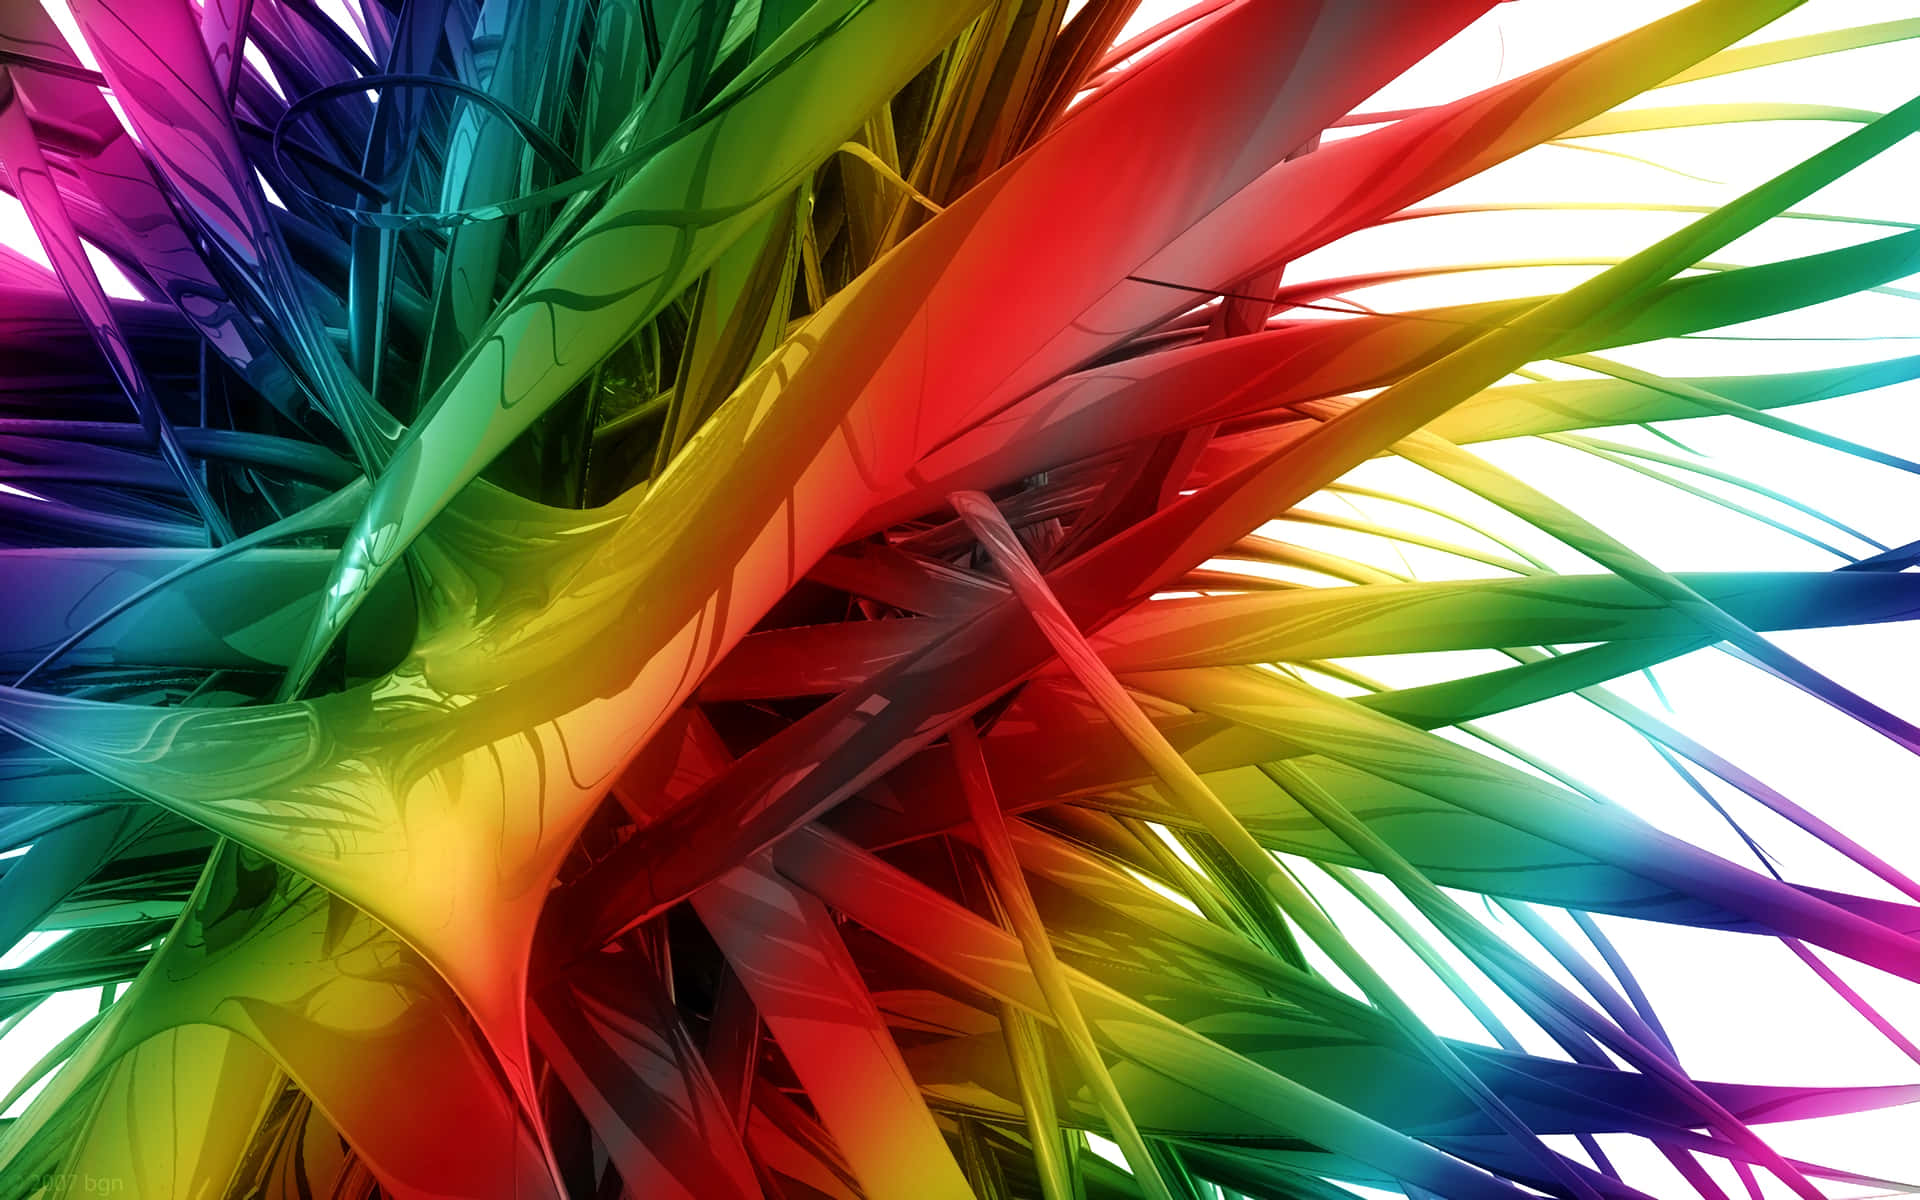 Spikes Of Paint In Colorful Abstract Art Background